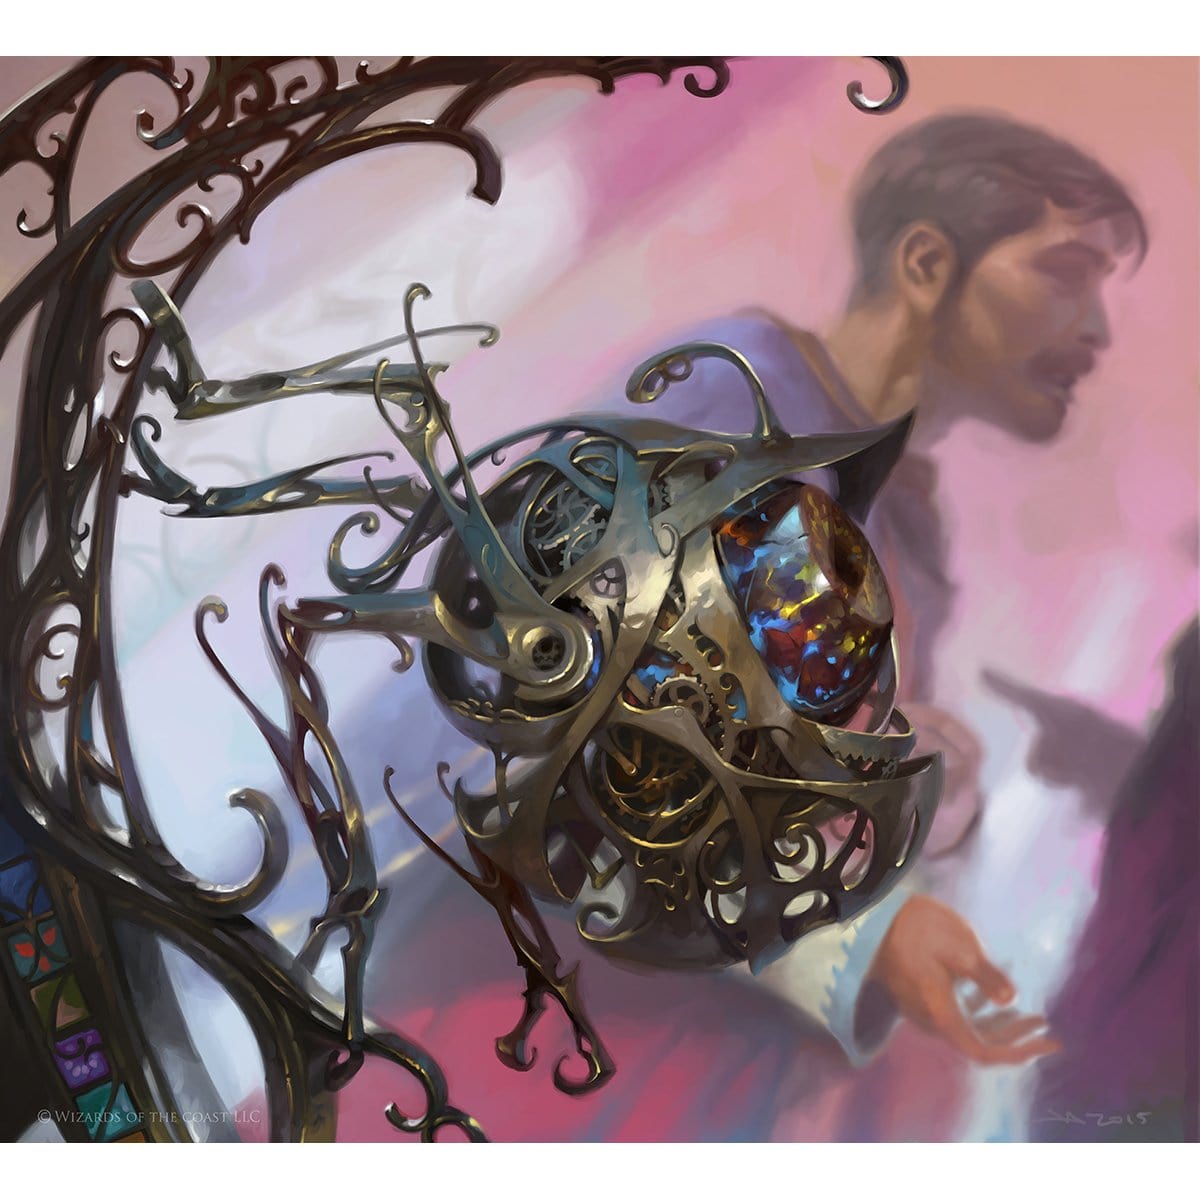 Servo Token Print - Print - Original Magic Art - Accessories for Magic the Gathering and other card games